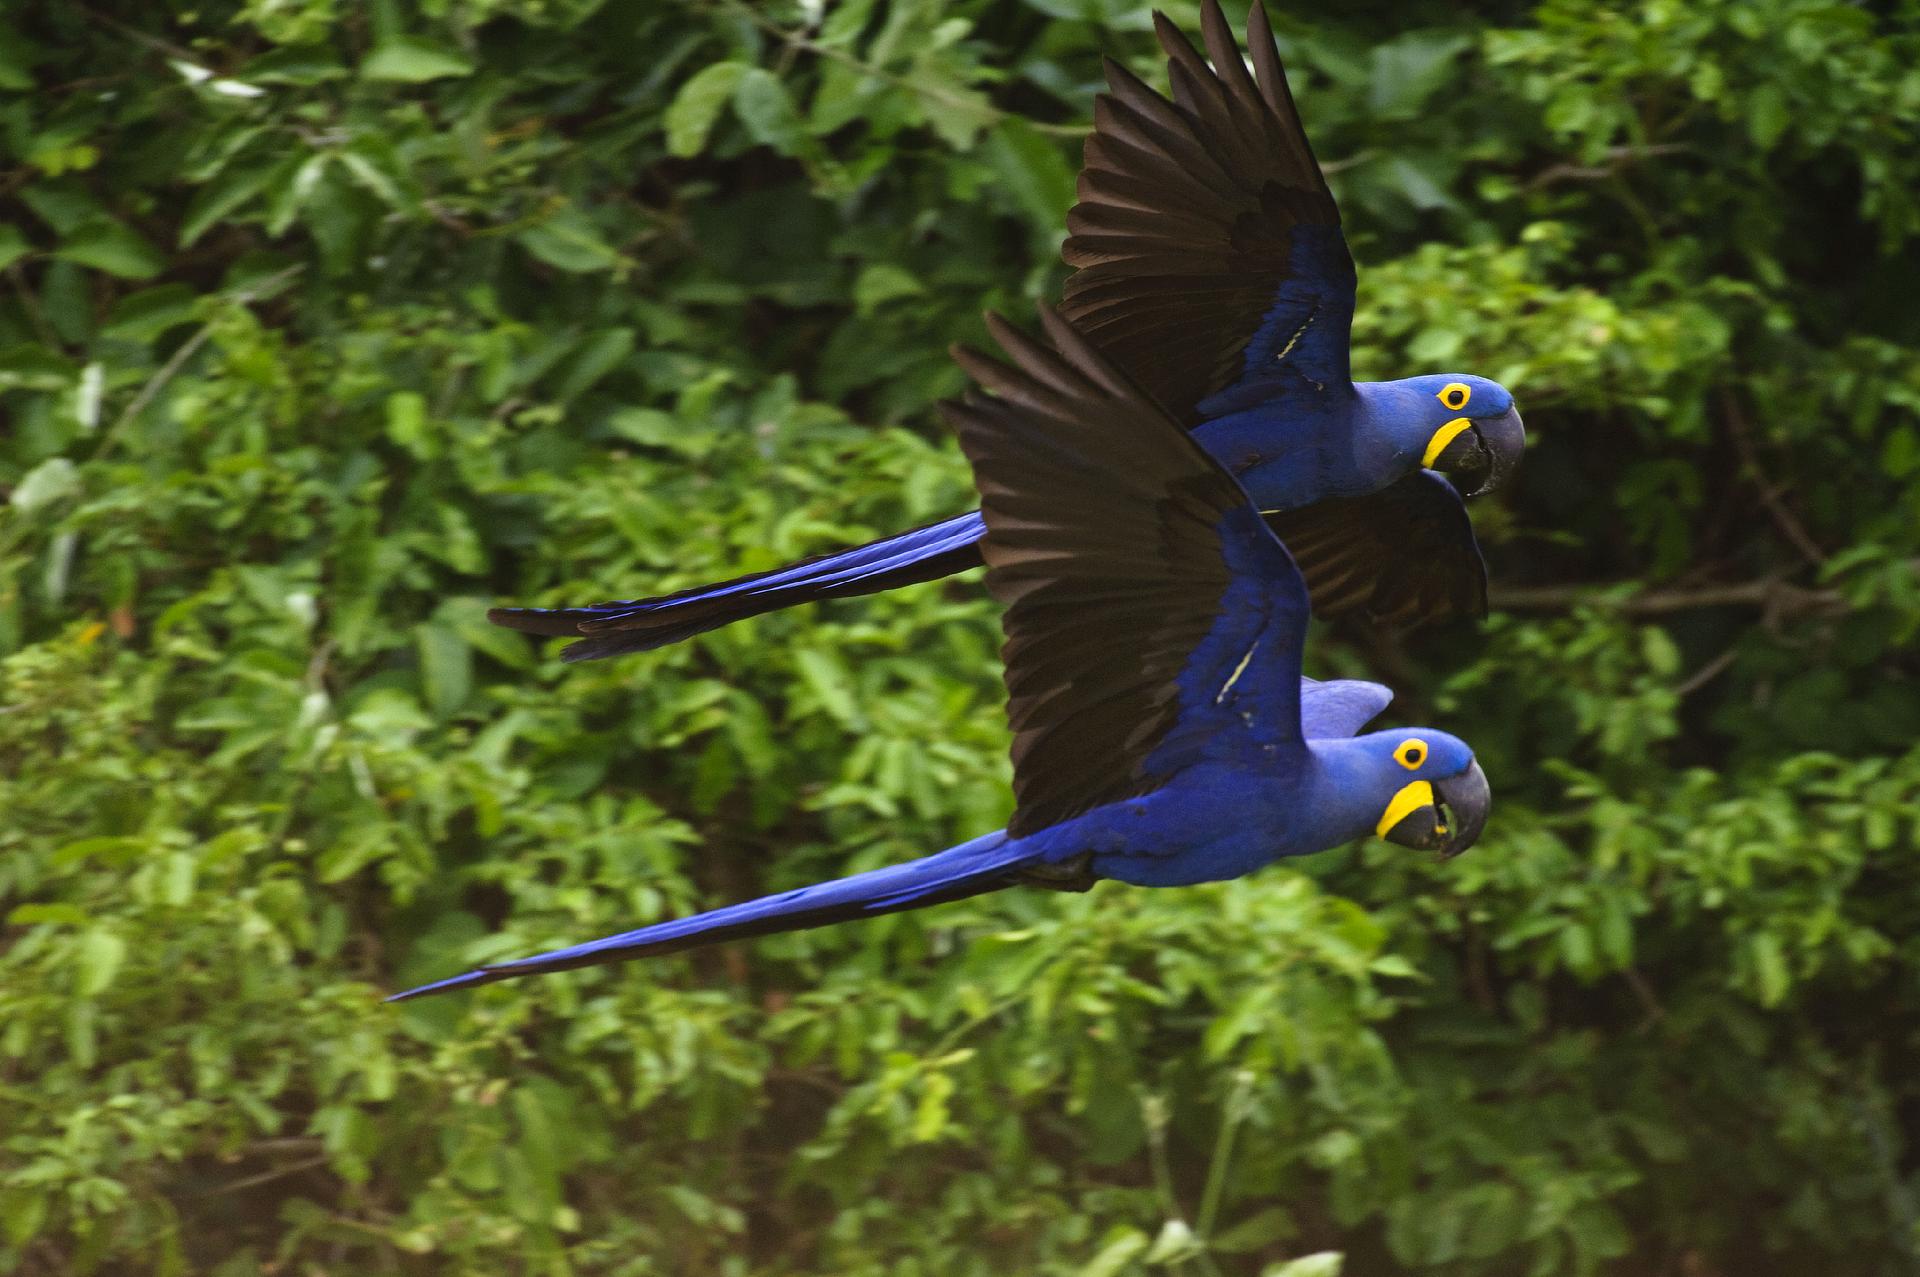 With support from Toyota since 1989, the Hyacinth Macaw Institute assists the protection and monitoring of a population of about 3,000 birds.